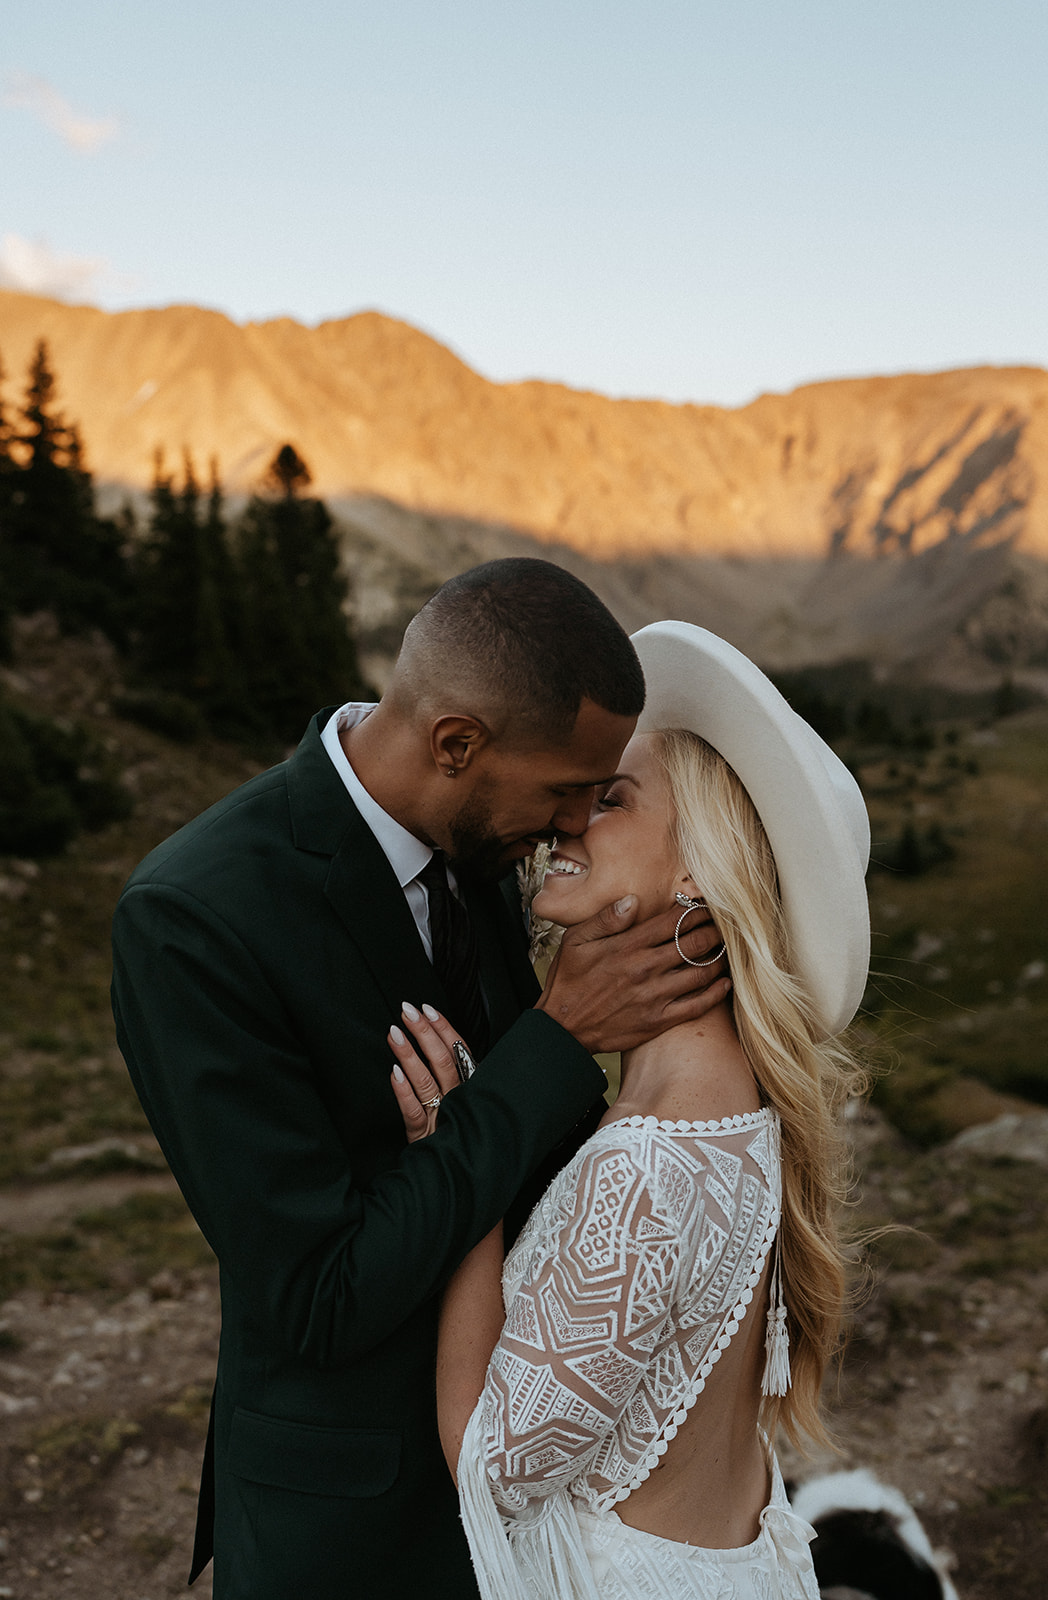 Newlyweds lean in for a kiss at sunset during their Hoosier Pass Elopement